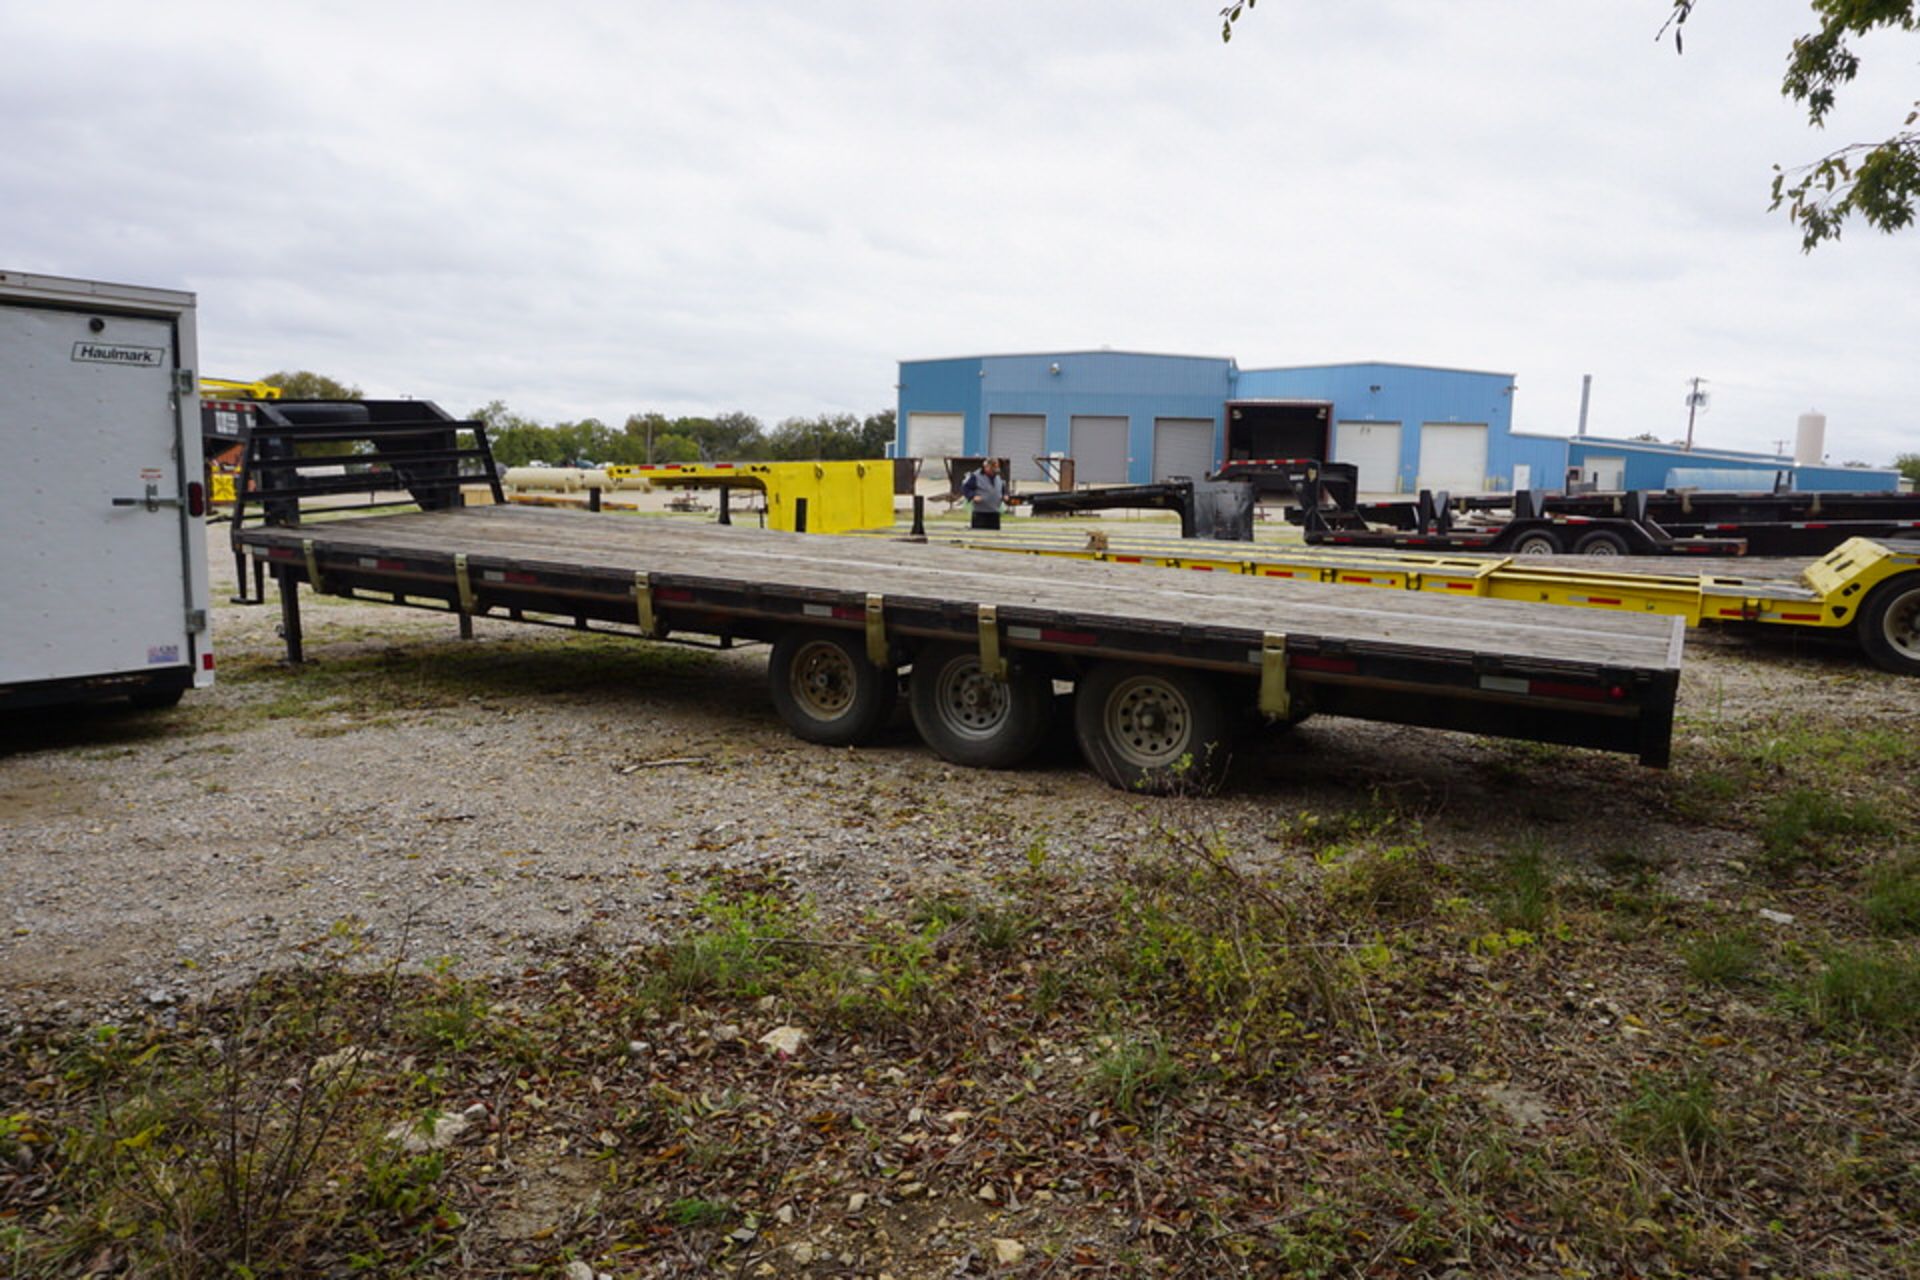 2012 8' x 30' WILD WEST GOOSE NECK TRAILER, MAX LOAD: 26,000 LBS (MUST BE REMOVED BY DECEMBER 22)